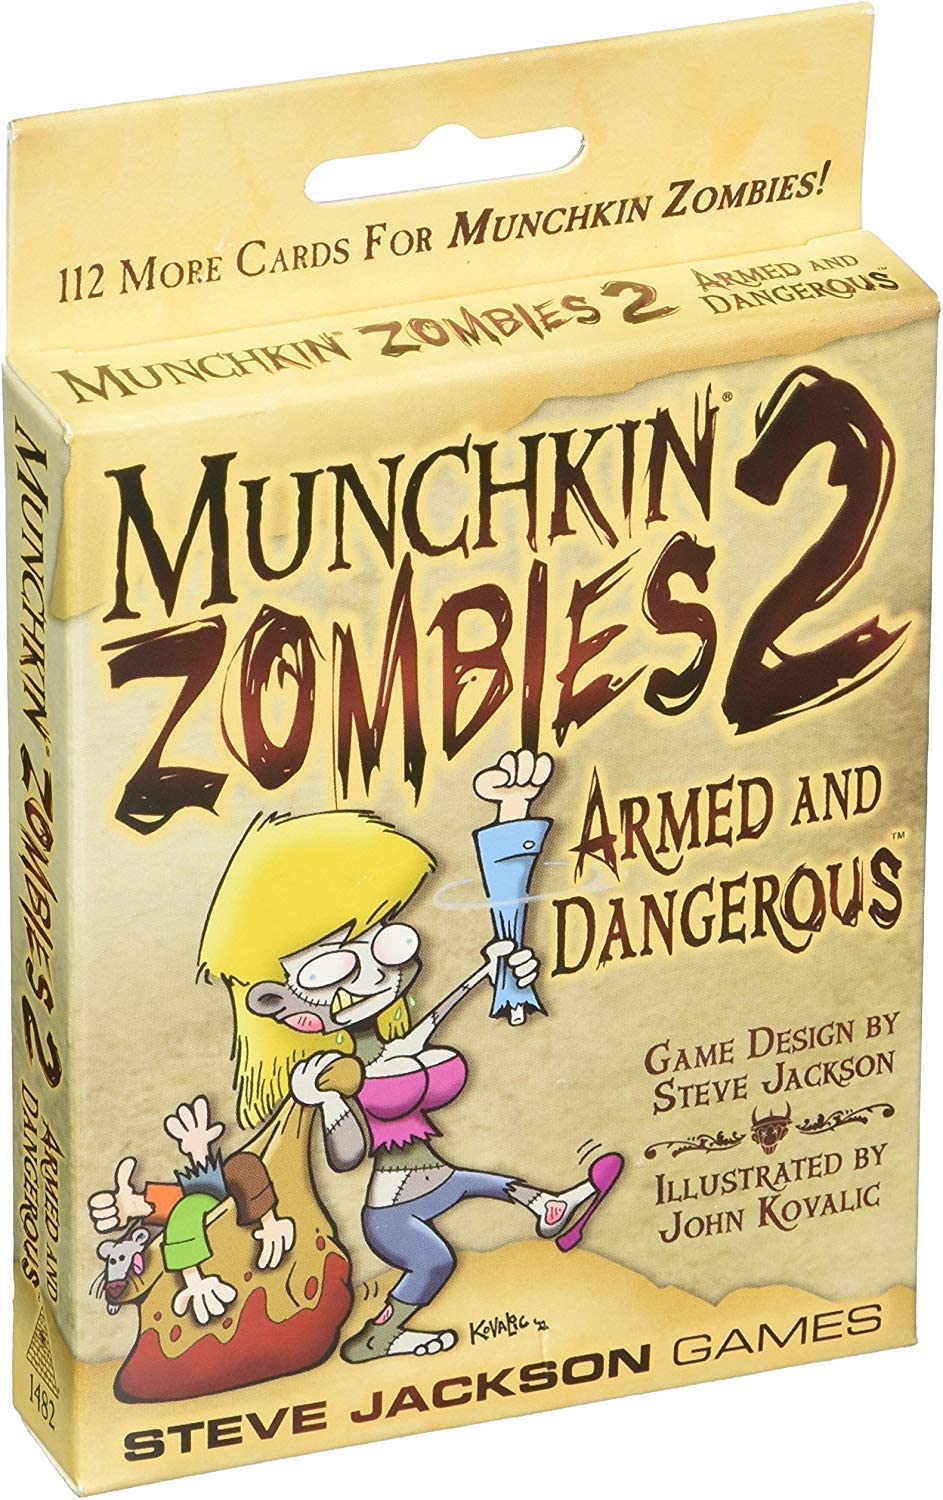 Munchkin Zombies - #2: Armed and Dangerous (Boxed Edition)